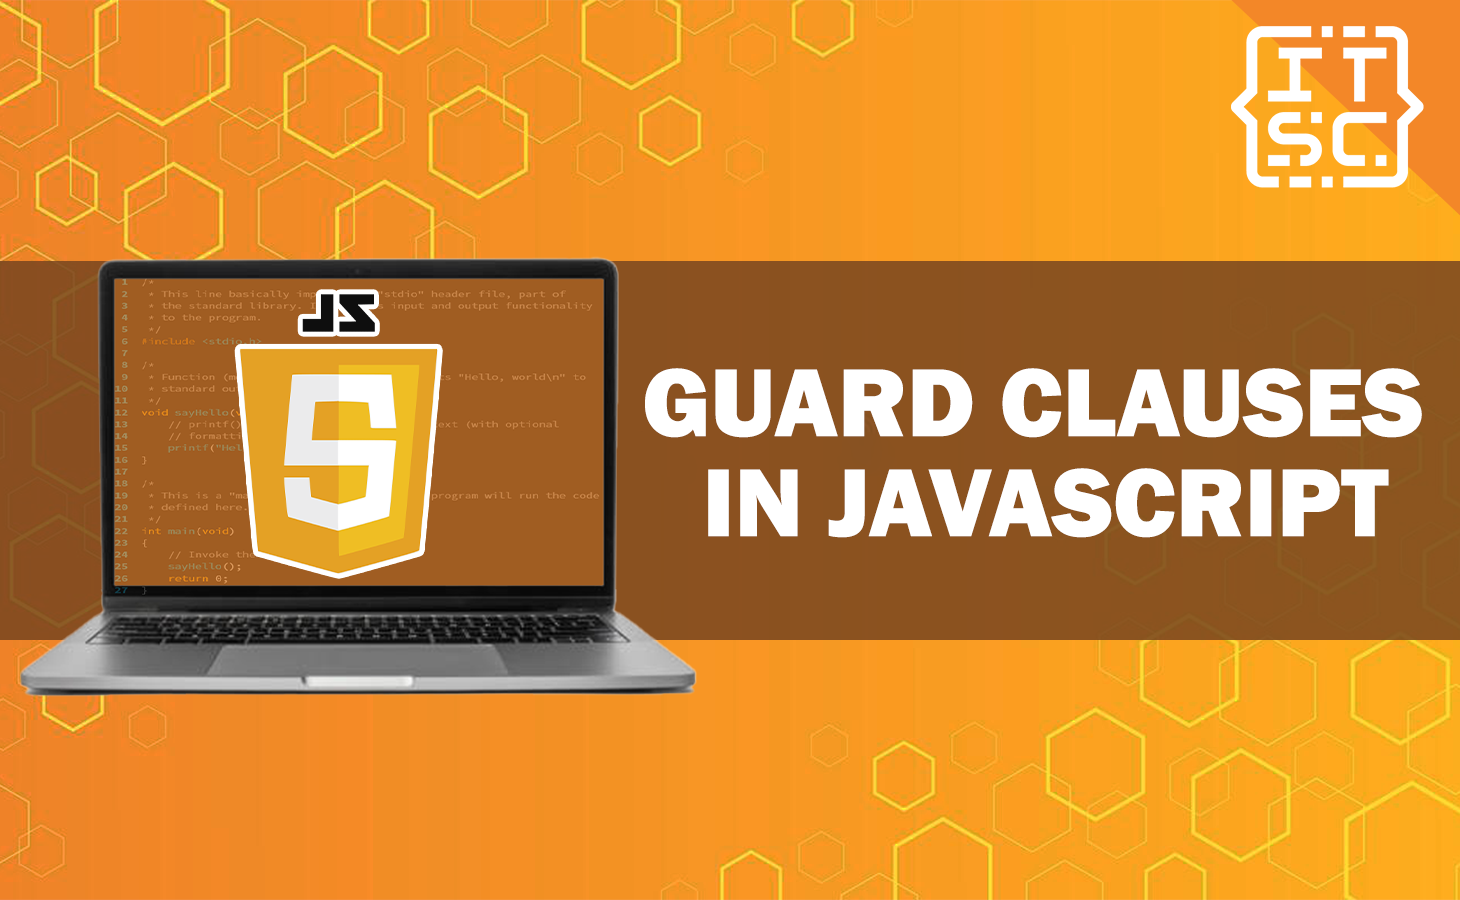 Simplifying Conditional Logic with Guard Clauses in JavaScript